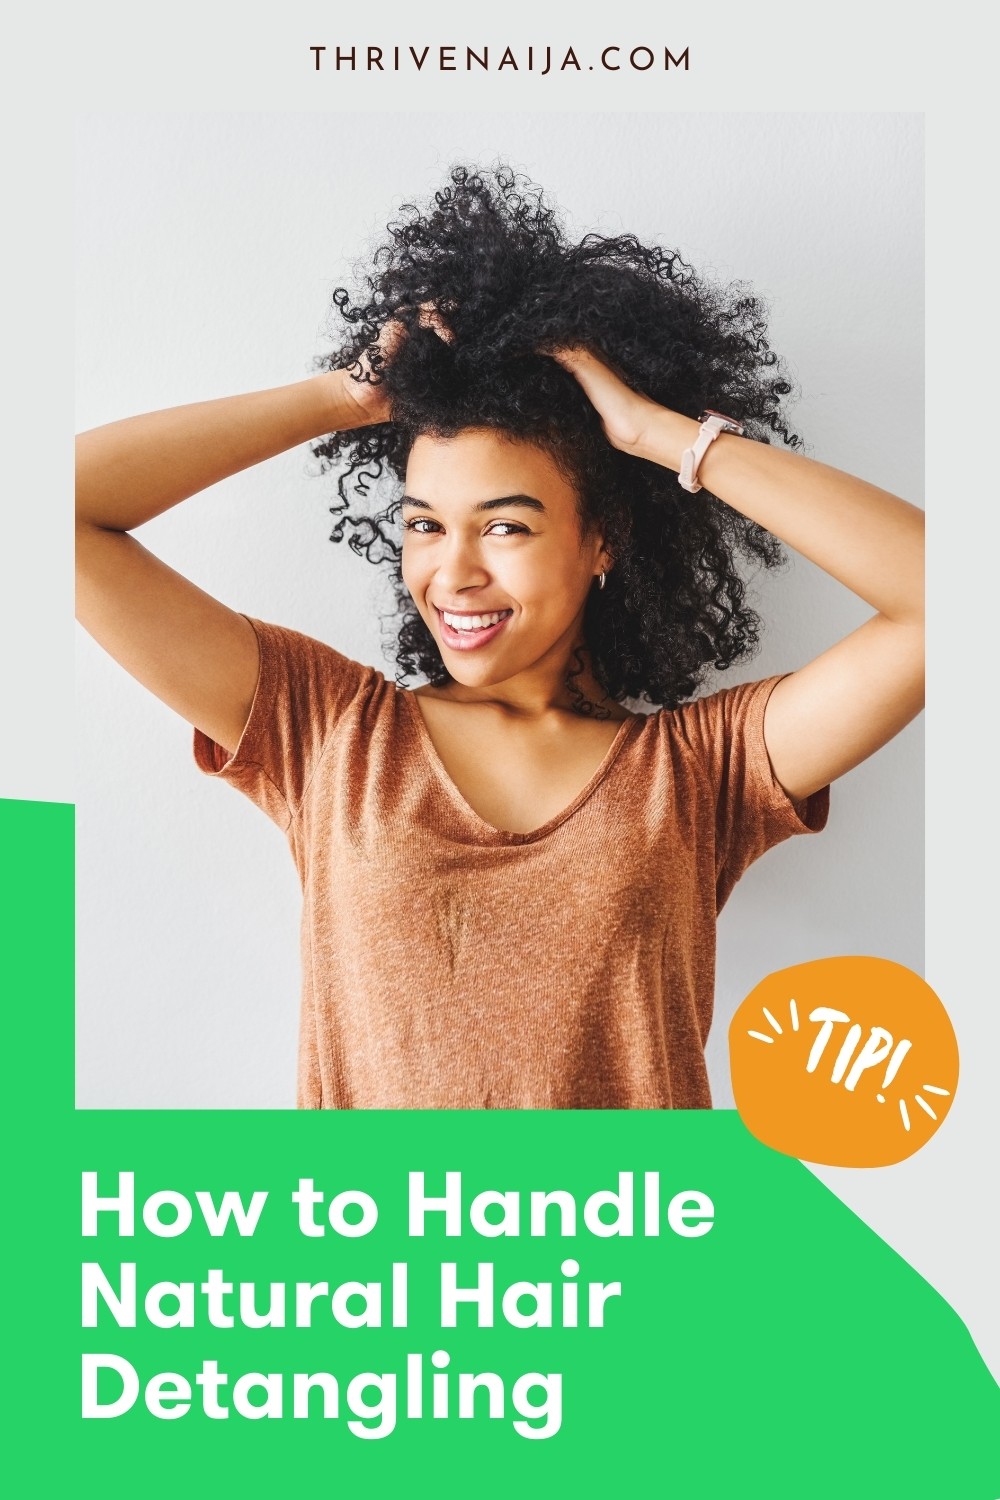 A guide to natural hair retention